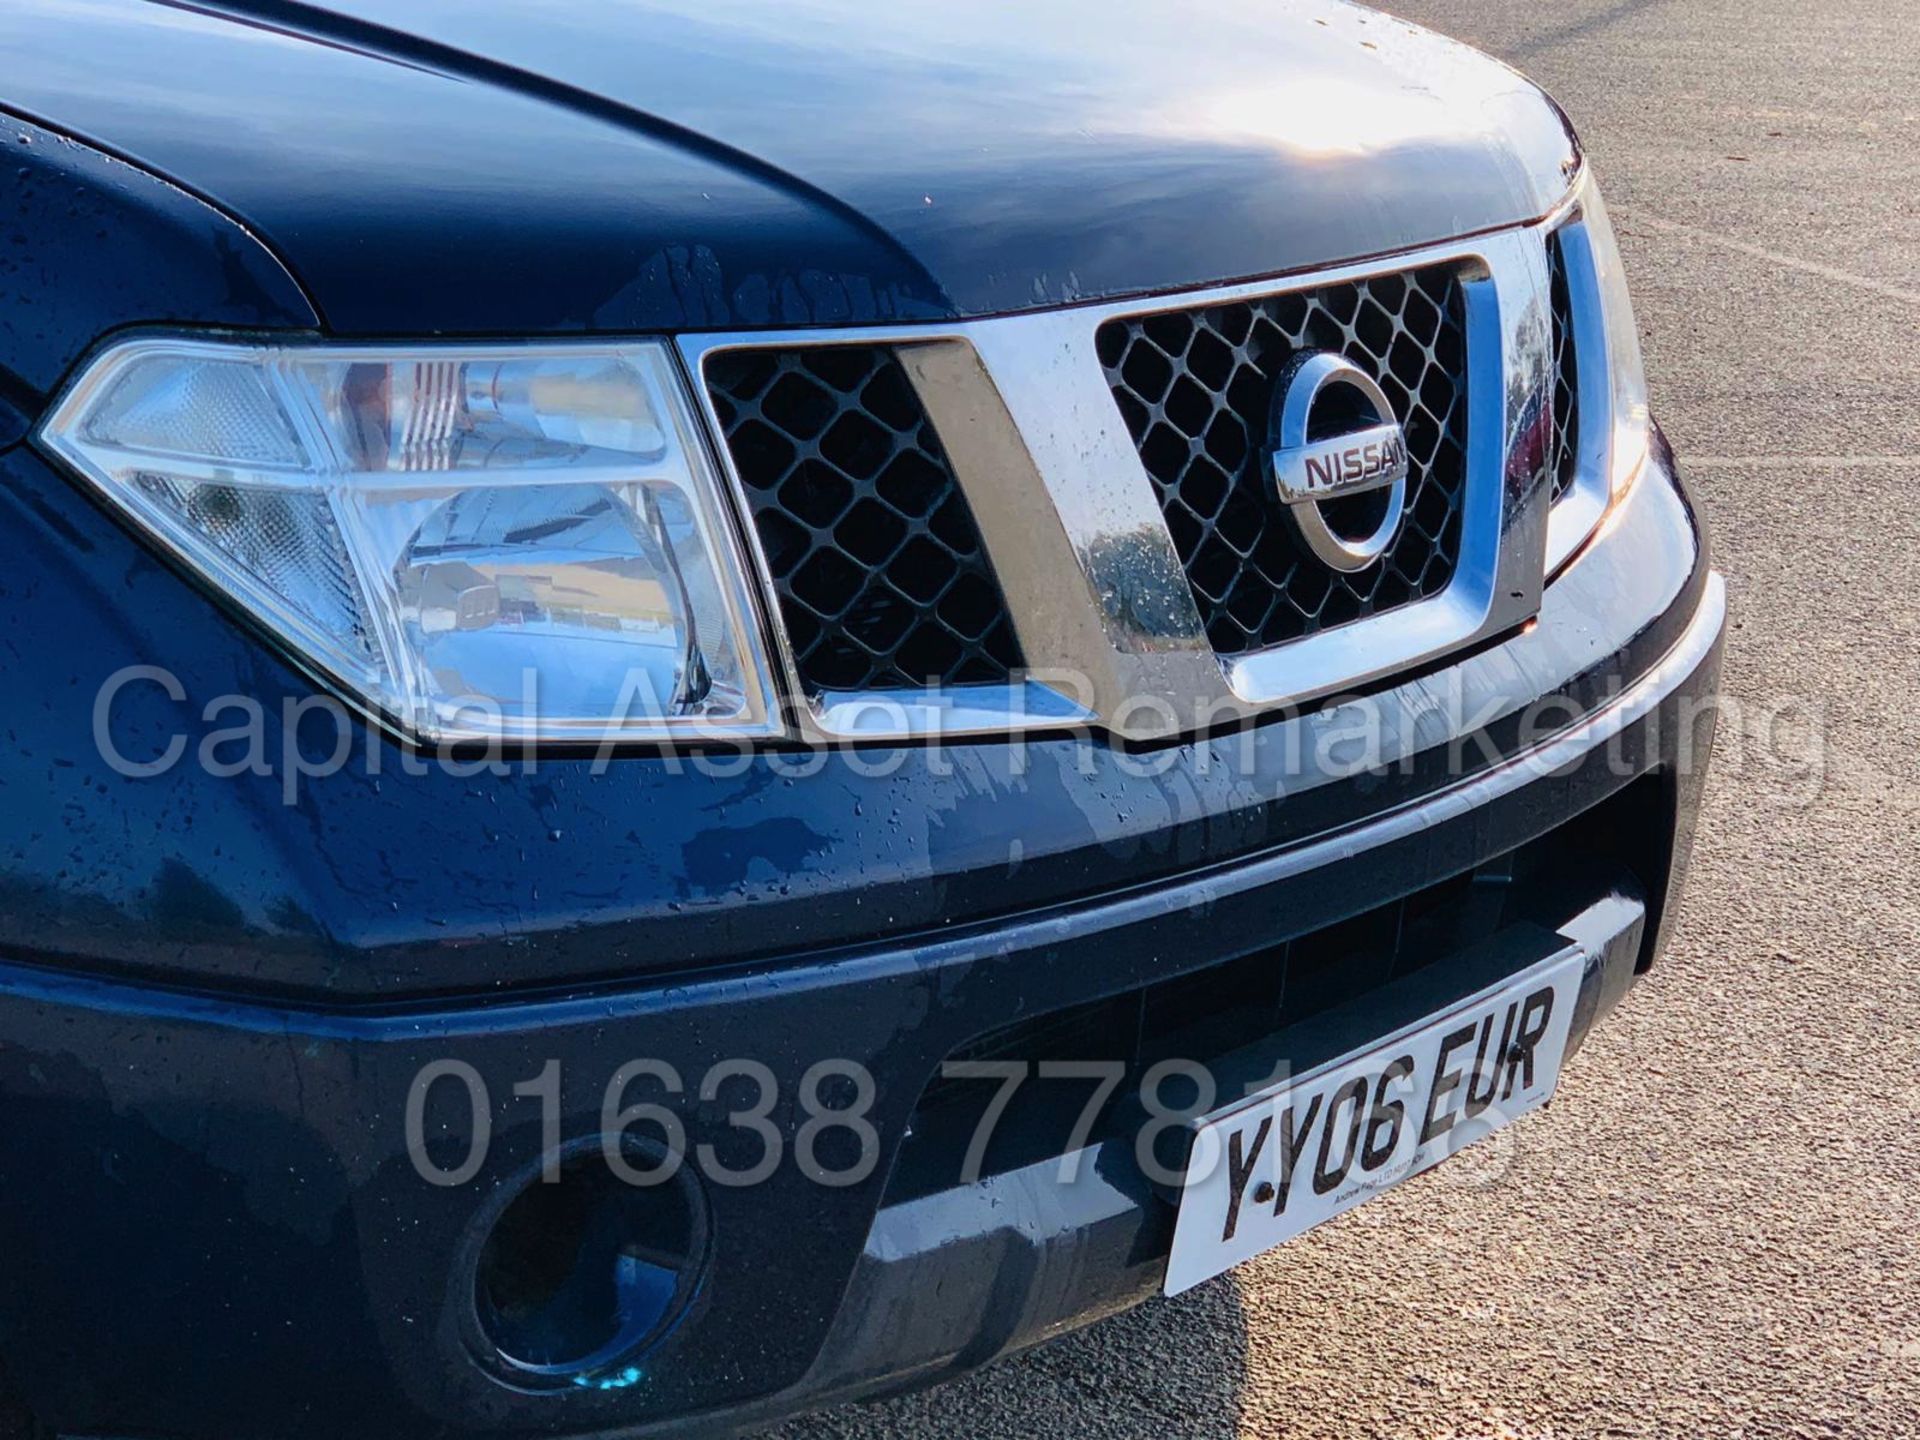 (On Sale) NISSAN NAVARA *SE EDITION* D/CAB PICK-UP (2006) '2.5 DCI - 175 BHP - 6 SPEED' *AIR CON* - Image 12 of 30